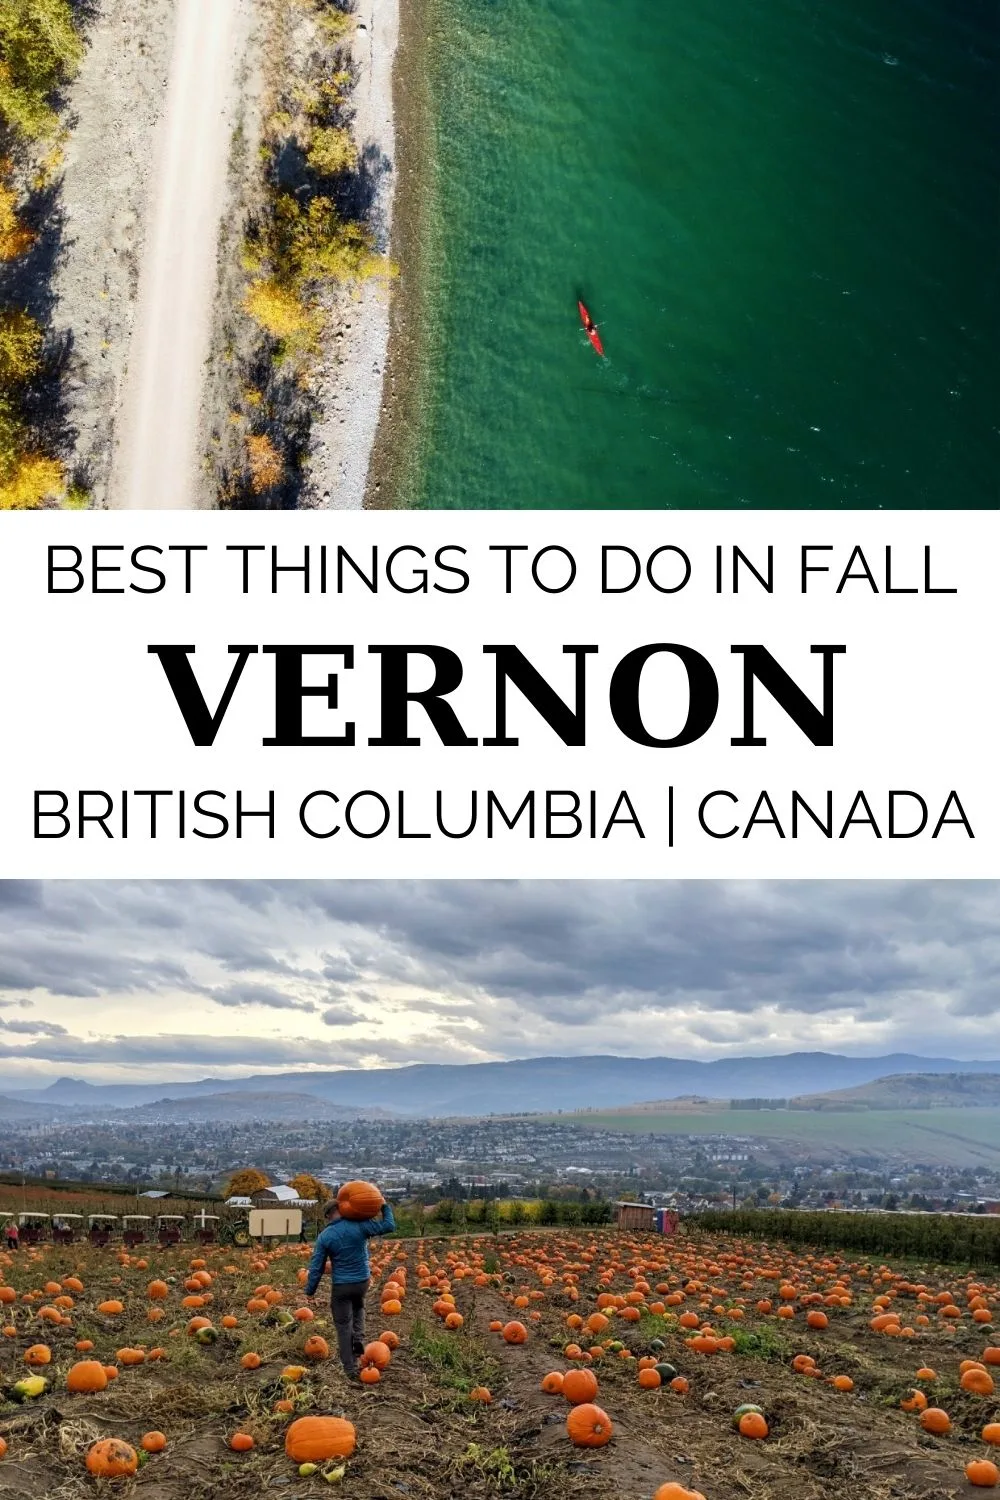 Until recently, we had never visited Vernon in fall. But what we discovered on our recent trip has convinced me that Vernon is one of the best places in British Columbia to visit at this time of year! This is particularly true if you like fall activities on the spooky side...click to find out the best things to do in fall in Vernon, BC, Canada! offtracktravel.ca